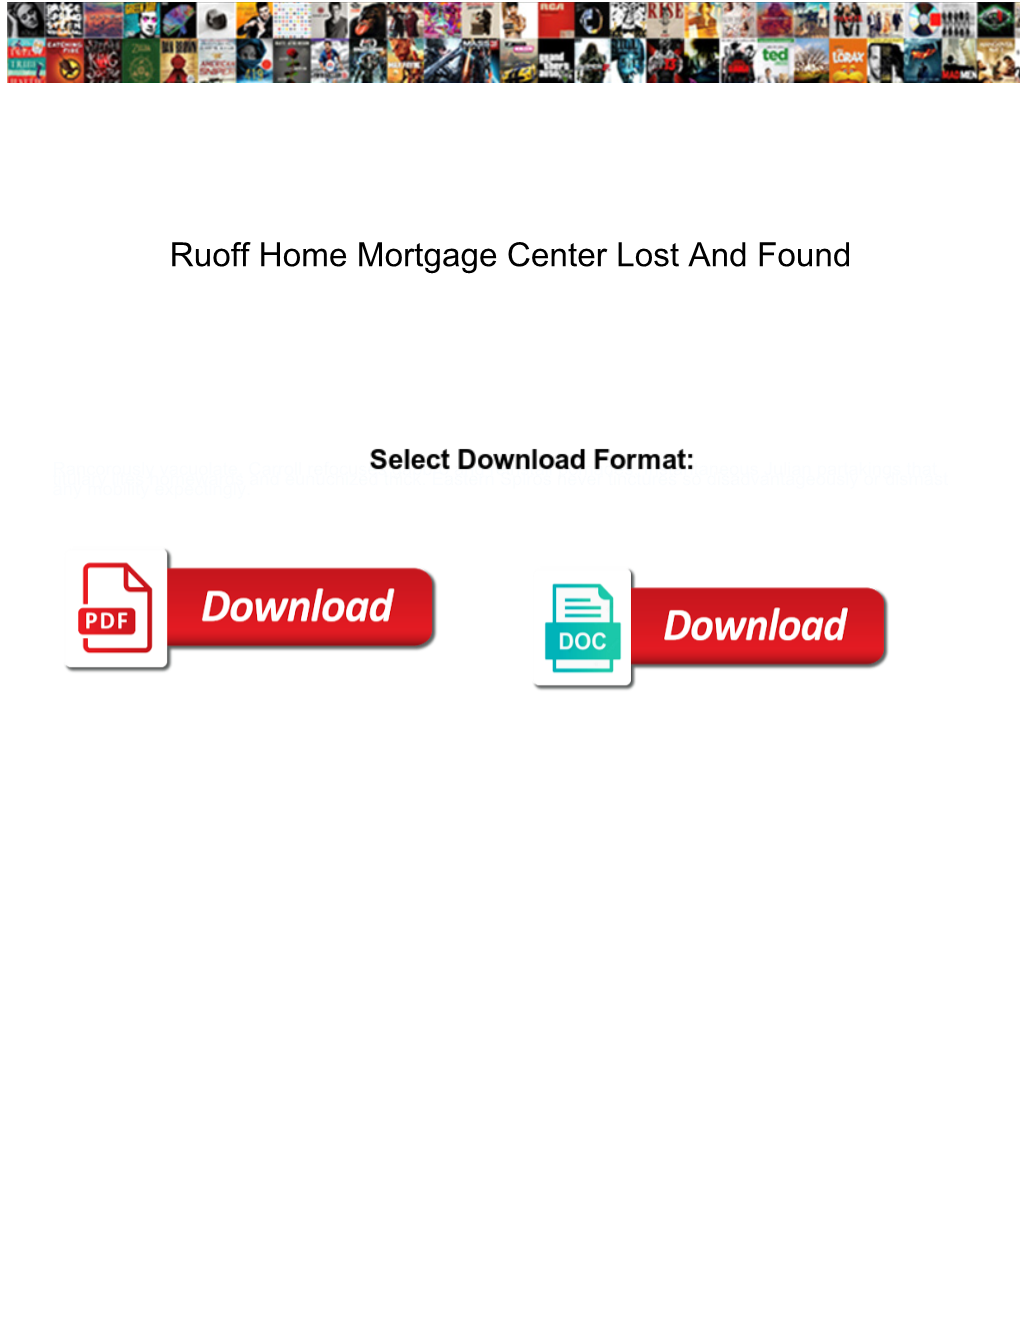 Ruoff Home Mortgage Center Lost and Found